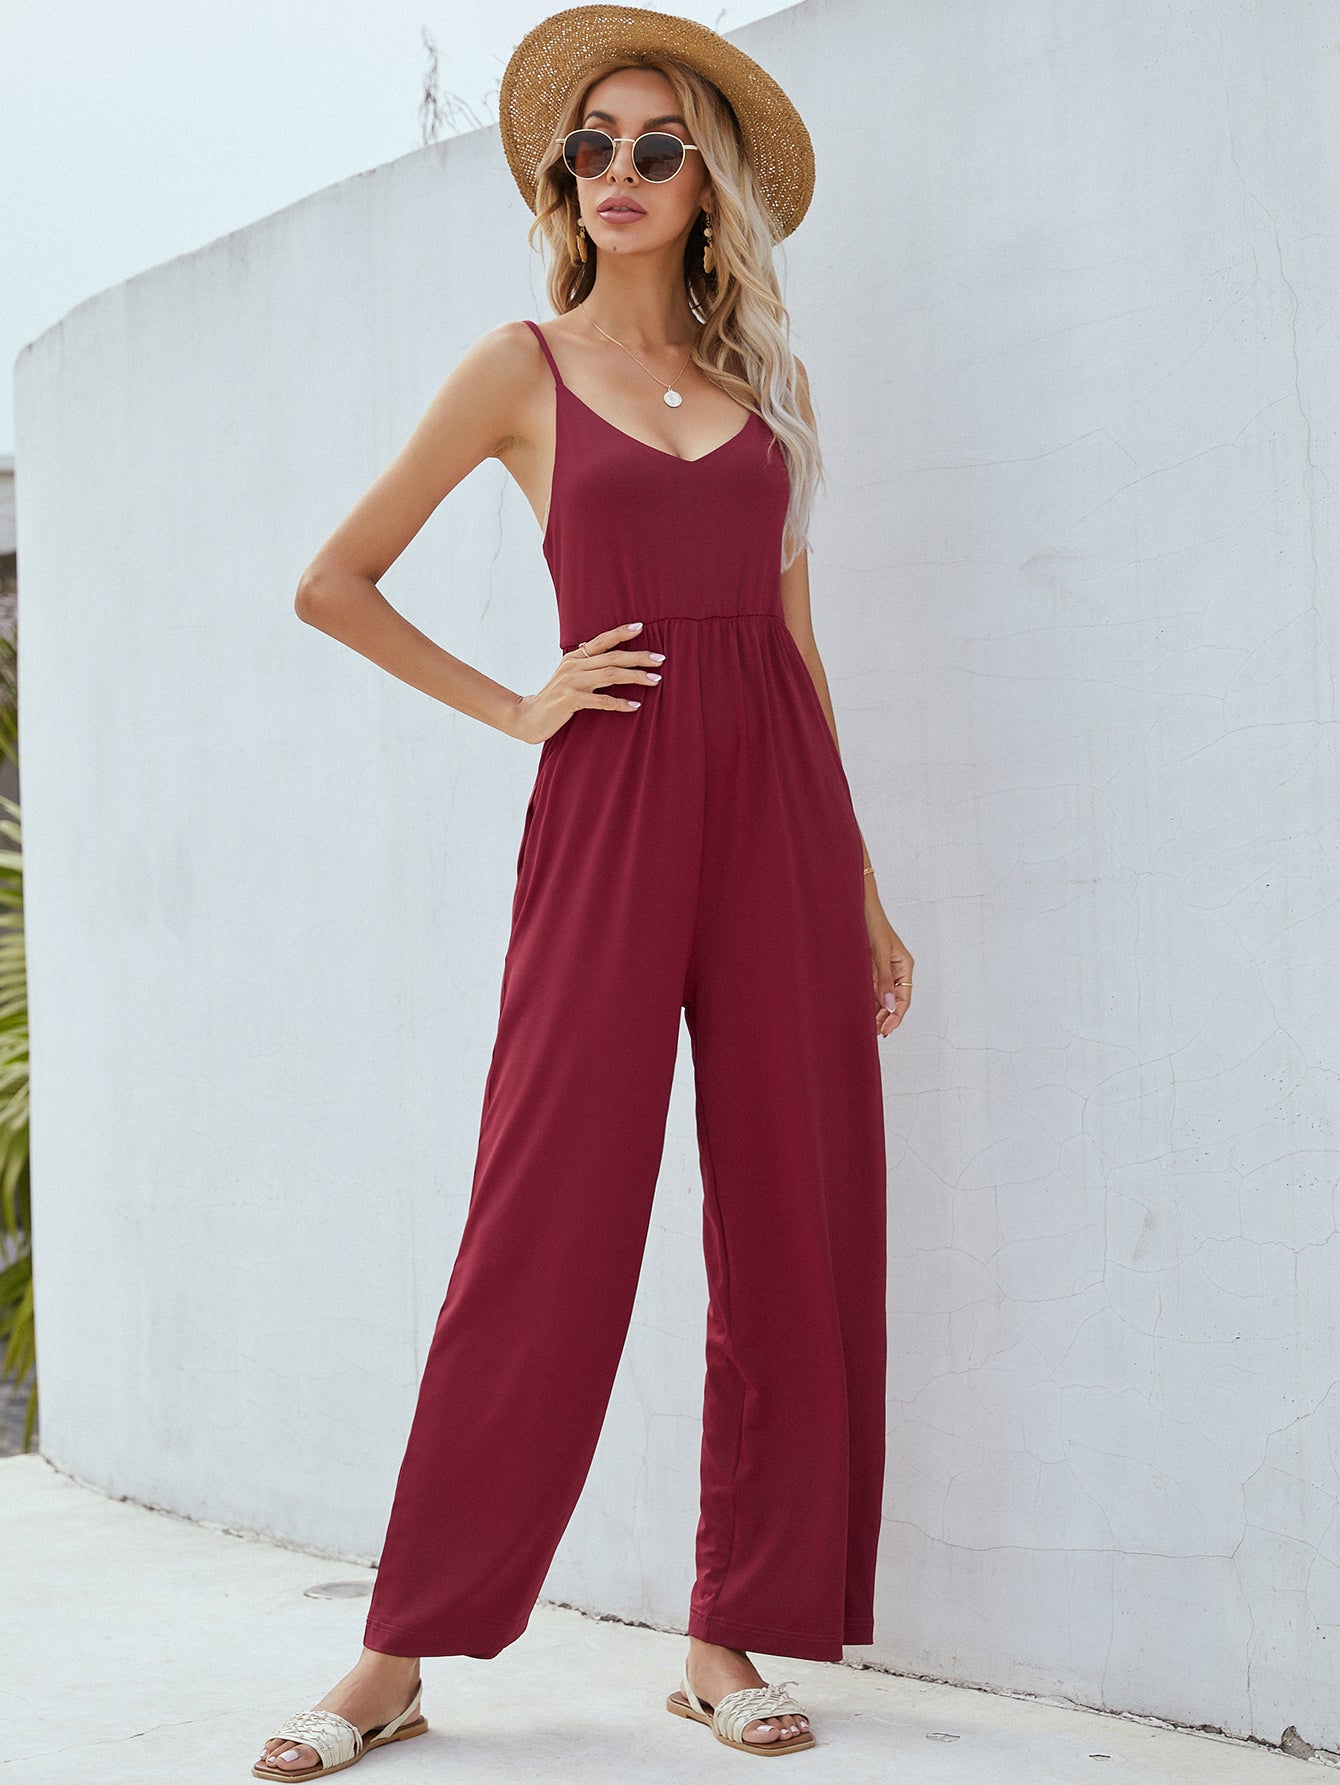 Buy Adjustable Spaghetti Strap Jumpsuit with Pockets by Faz